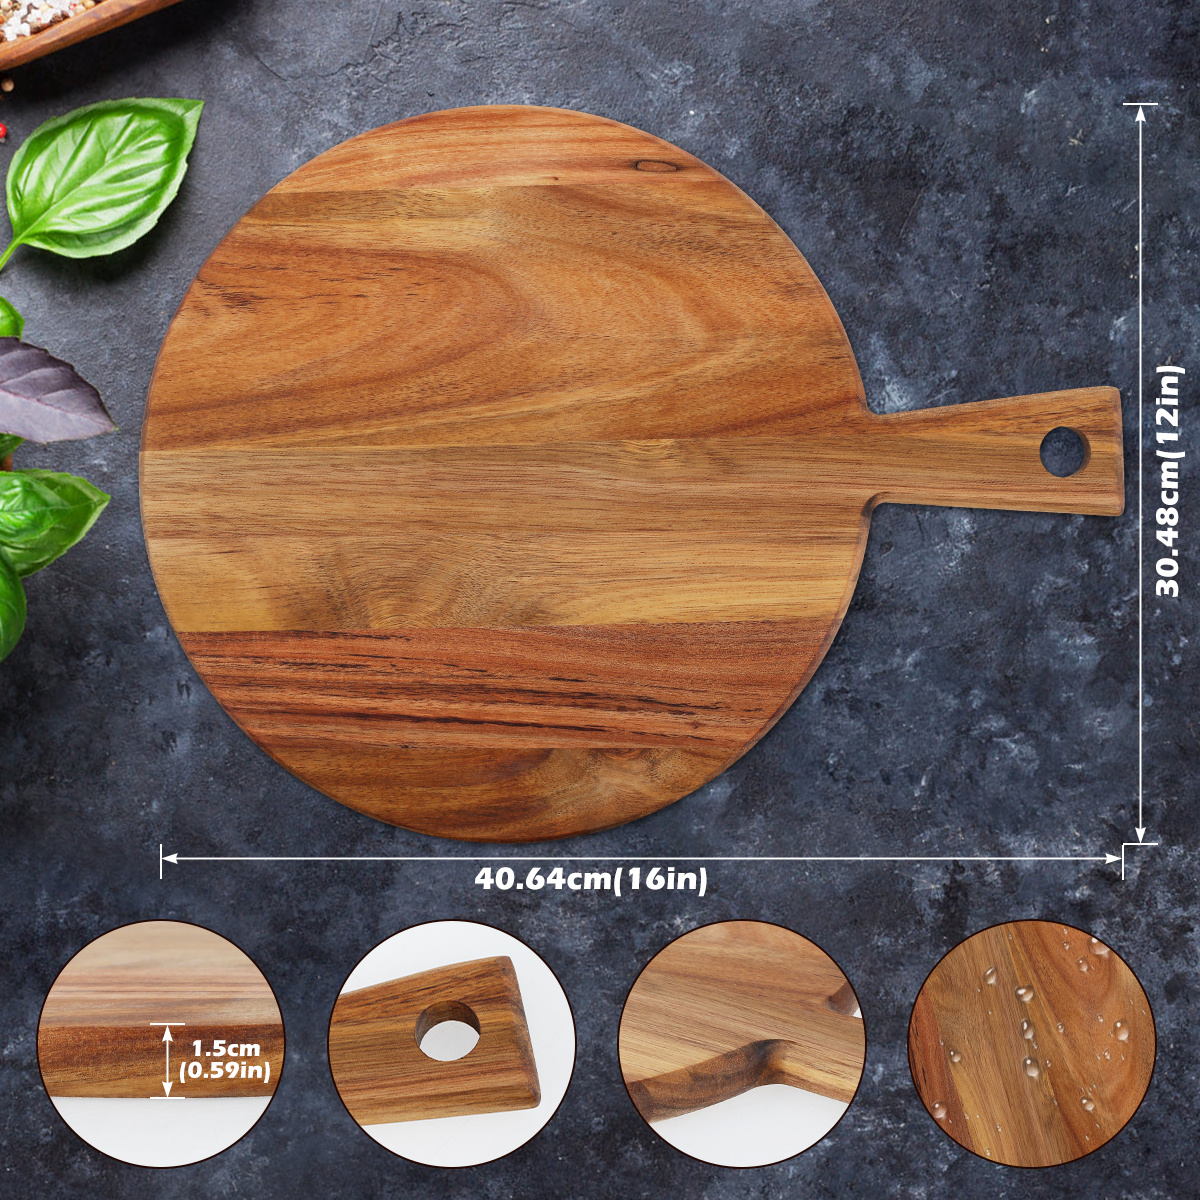 1pc Acacia Wood Cutting Board, Serving Board, Pizza Peel, Safe Cheese &  Charcuterie Board, Dishwasher Safe Fruit Board, Home & Dormitory Vegetable Chopping  Board, Kitchen Supplies, Kitchen Gadget, Christmas Gift Tool